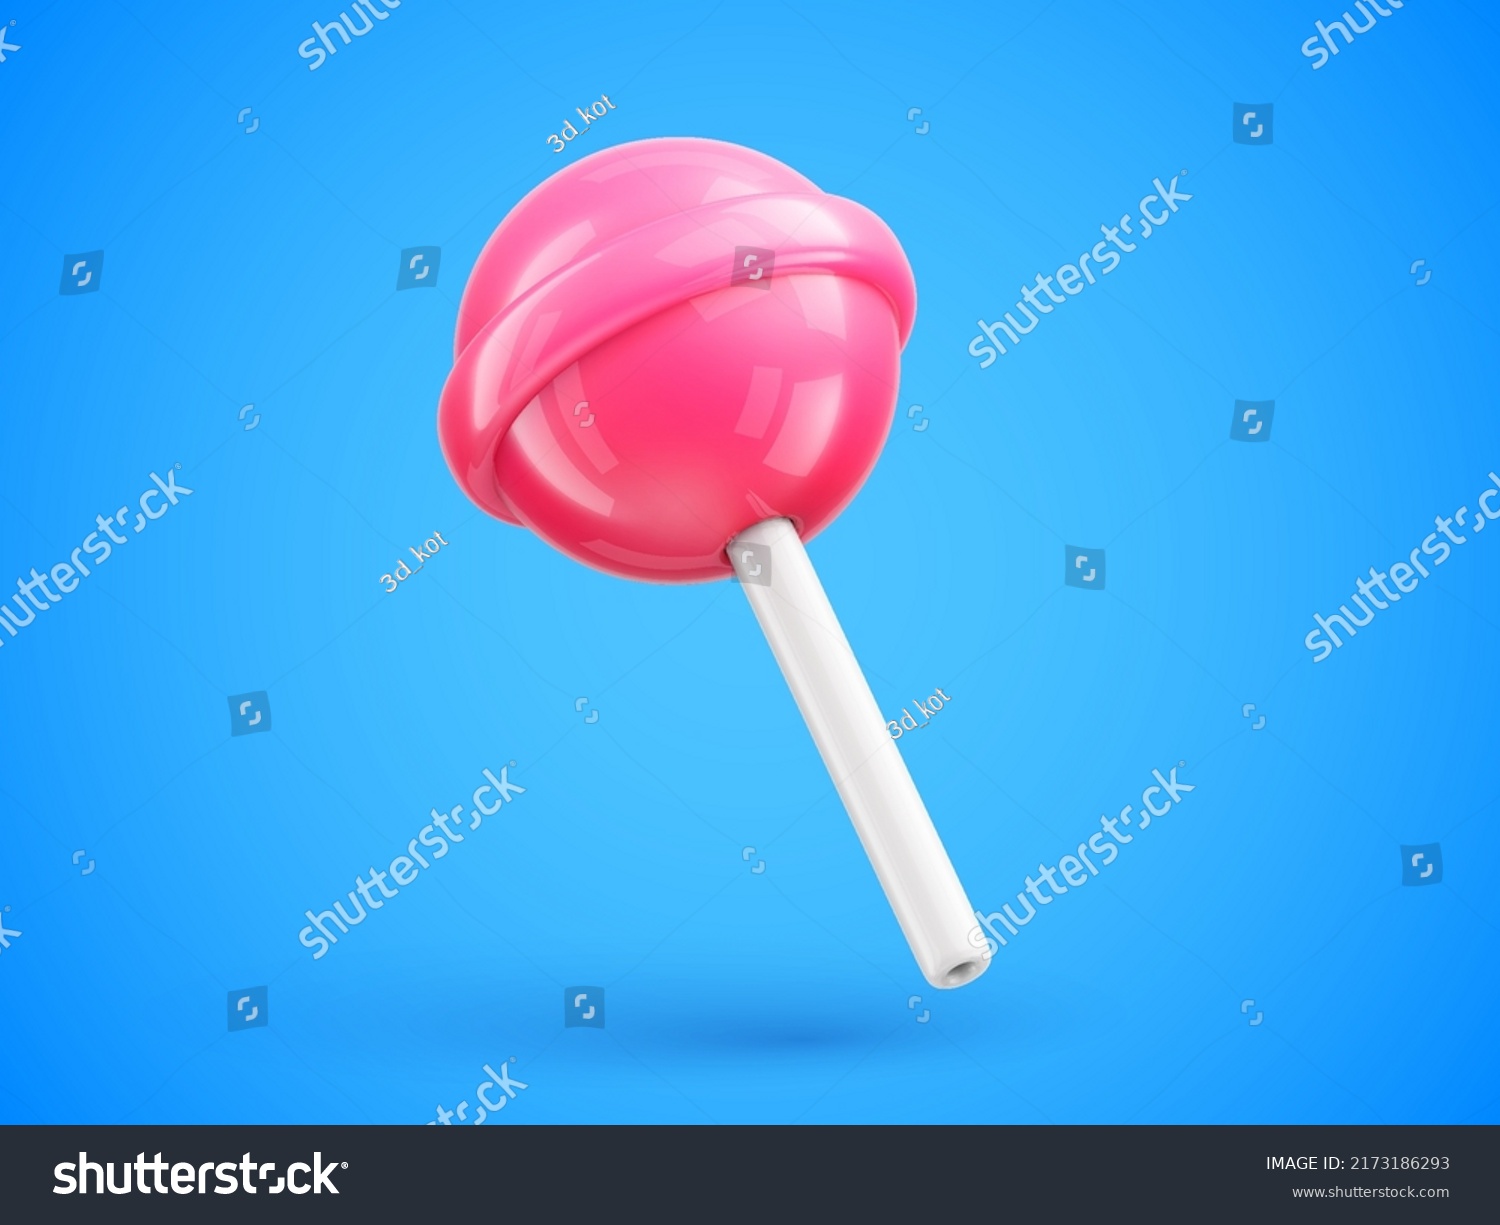 Sweet Cute Pink Lollipop On Stick Stock Vector (Royalty Free ...